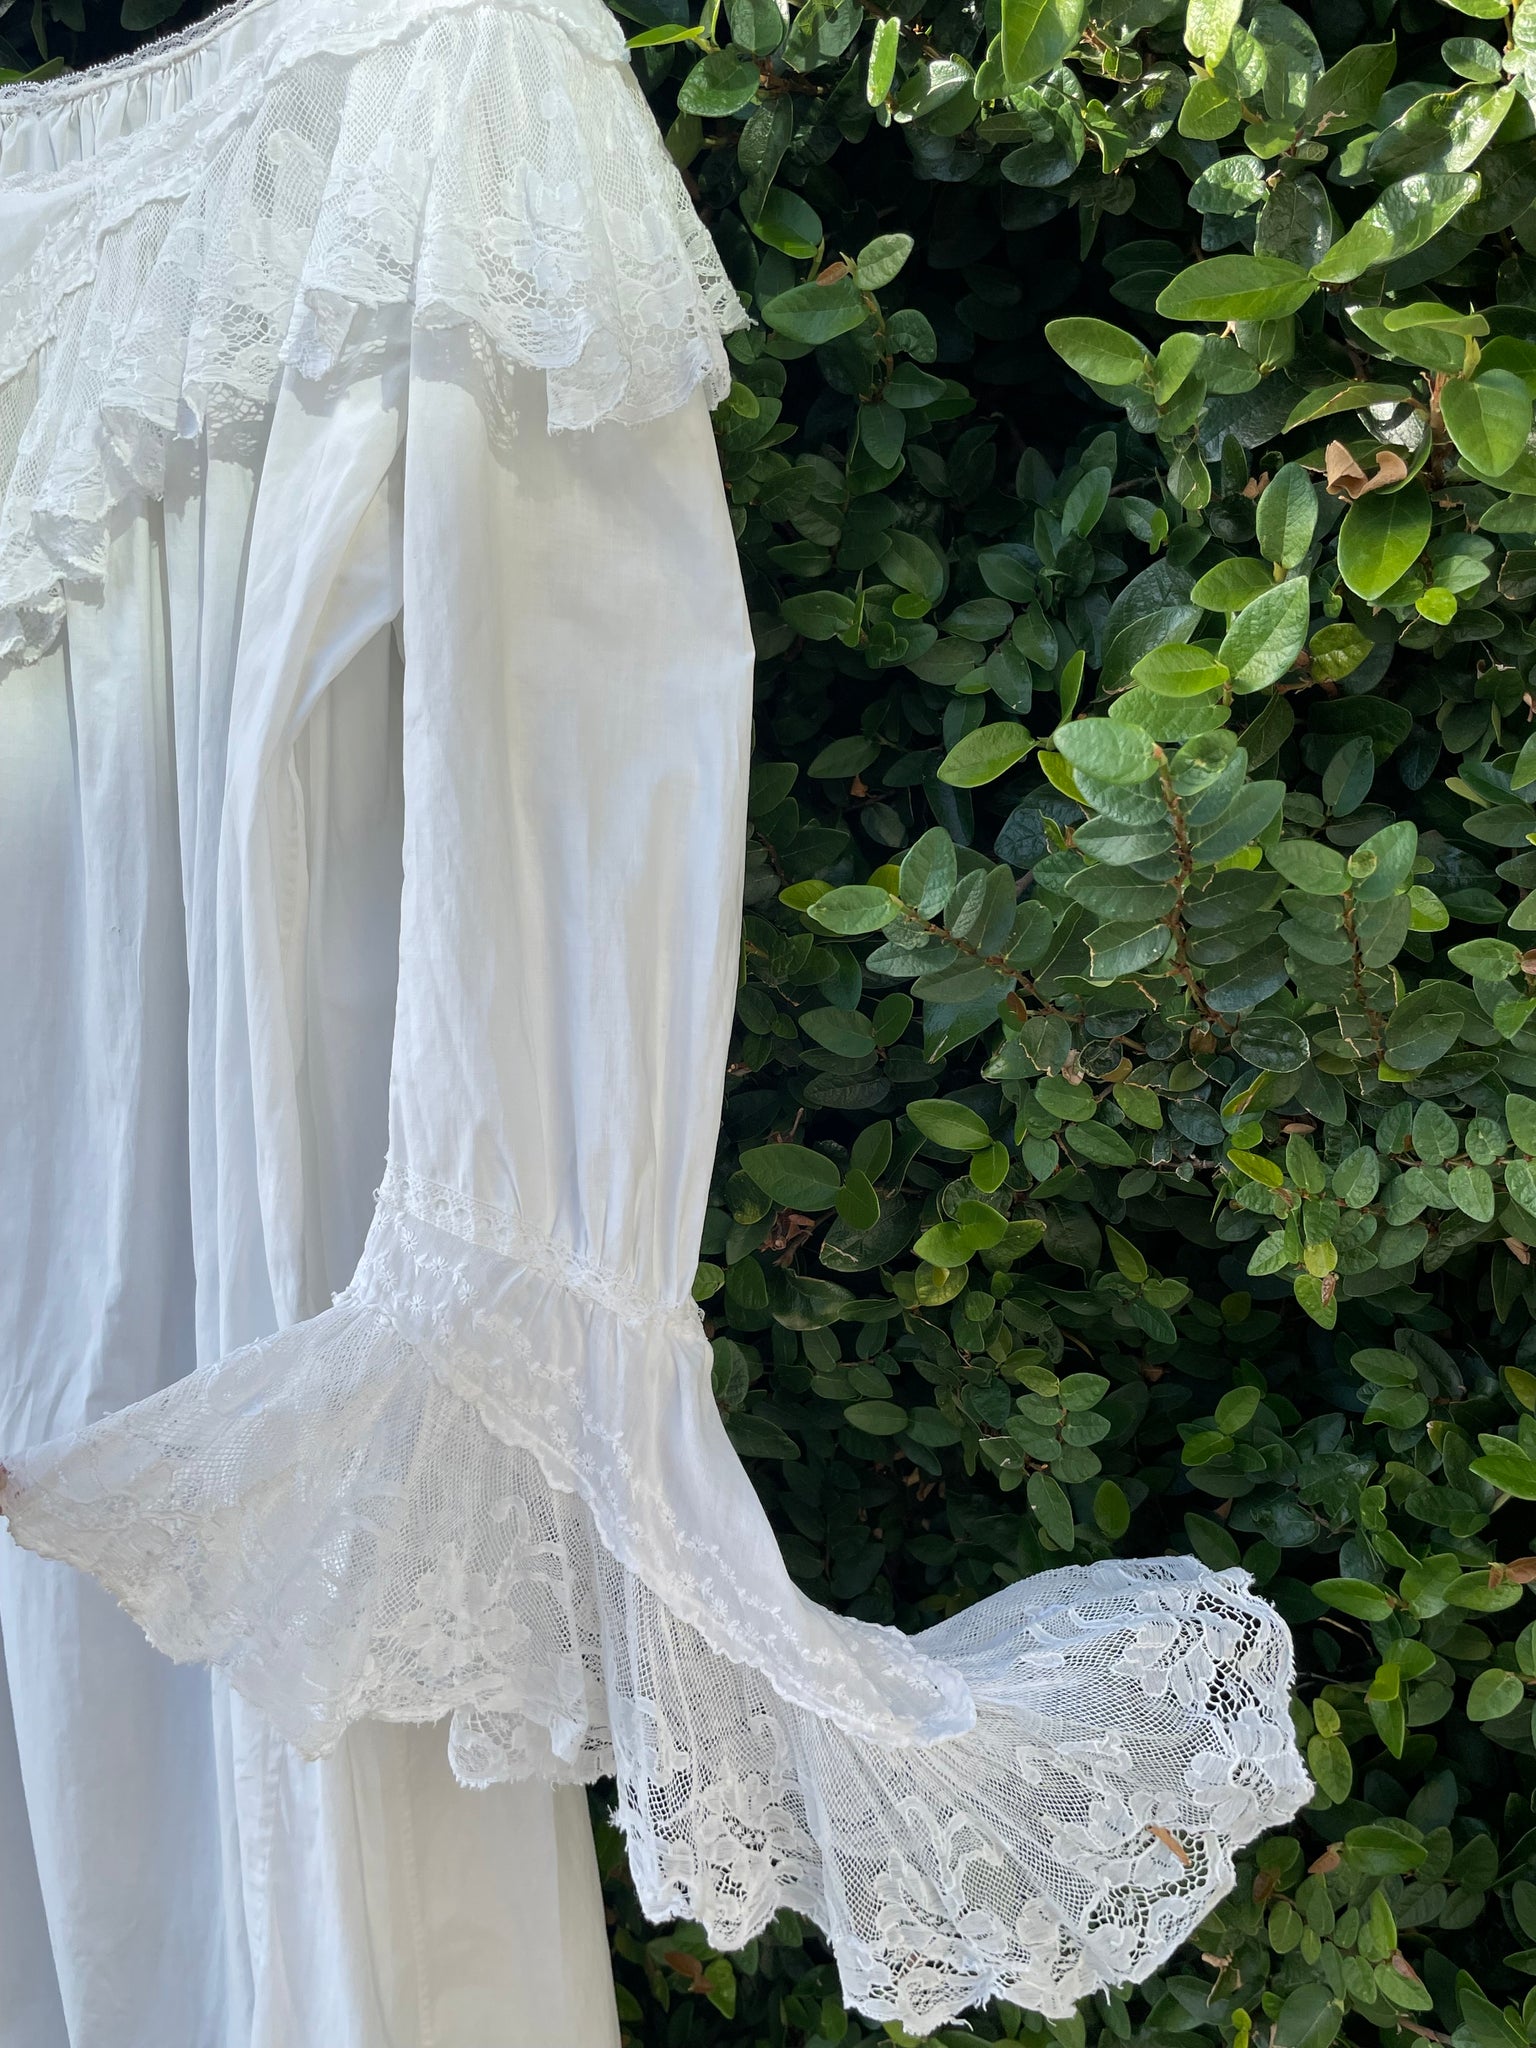 Late 19th C Cotton Ruffled Lace Angel Sleeve Trousseau Gown